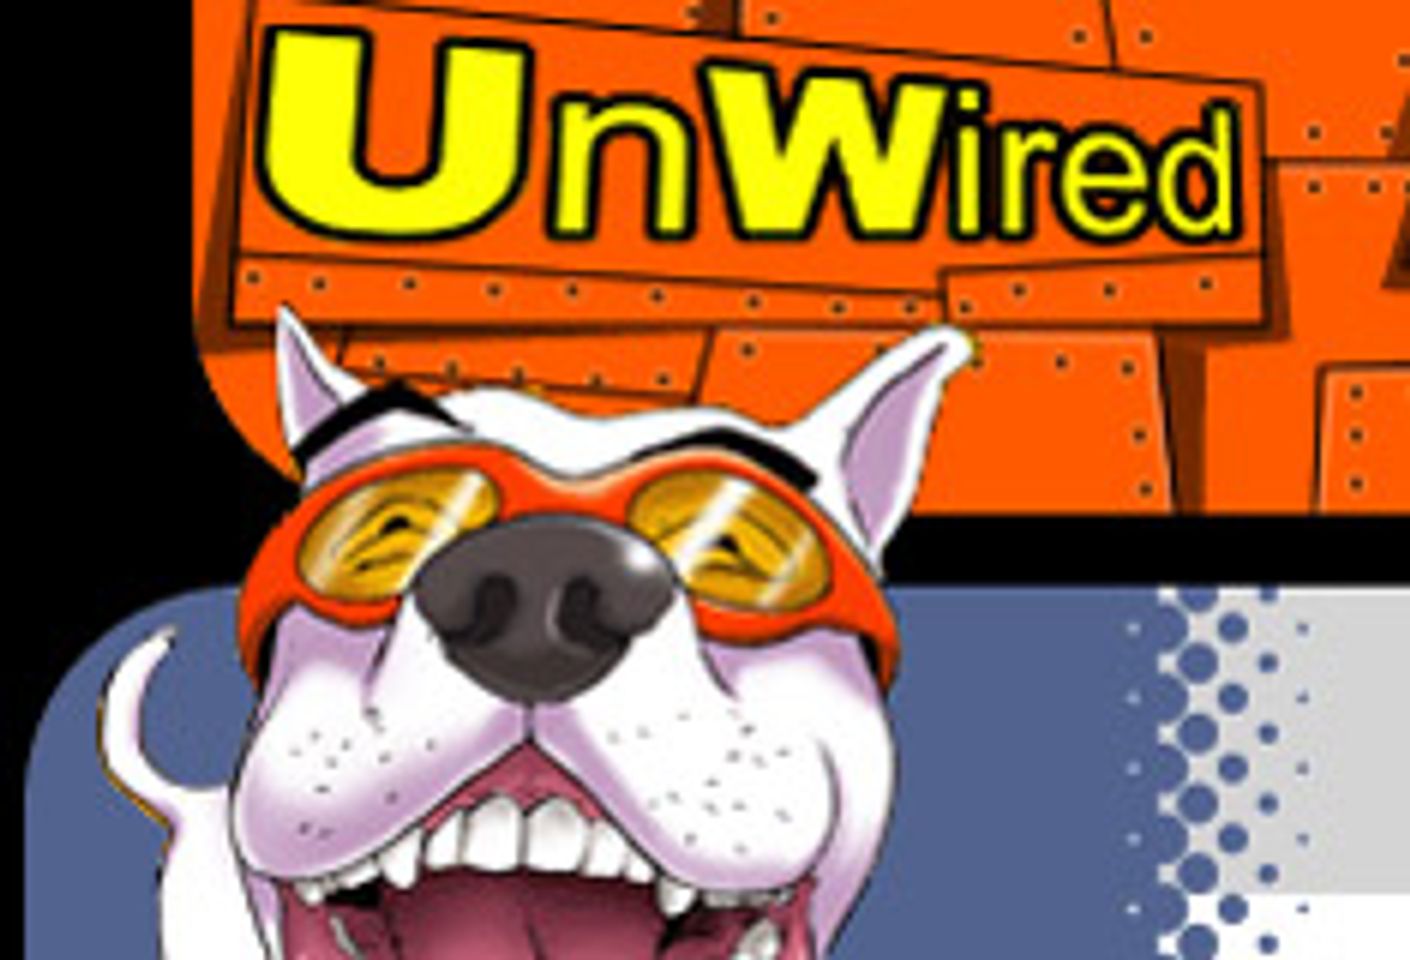 UnWired Brings Erotic Games, Product Placement to PSP